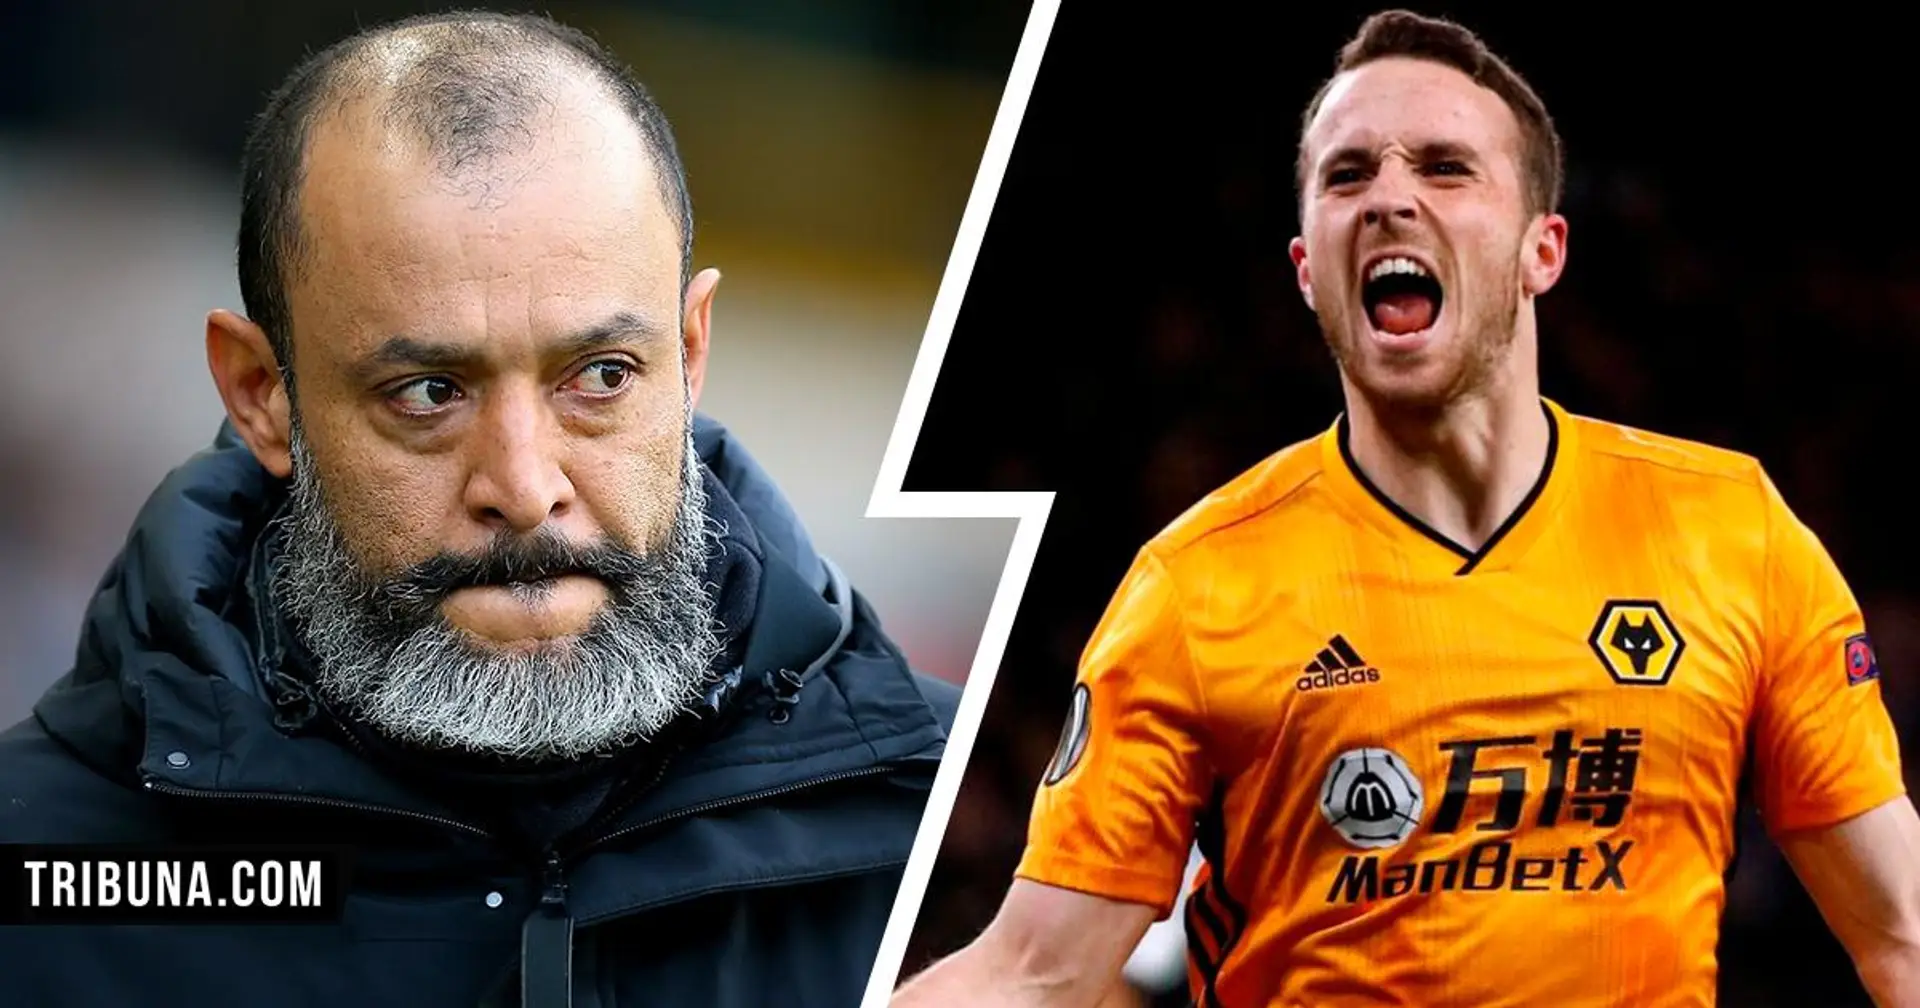 Wolves boss Nuno confirms Jota has joined Liverpool